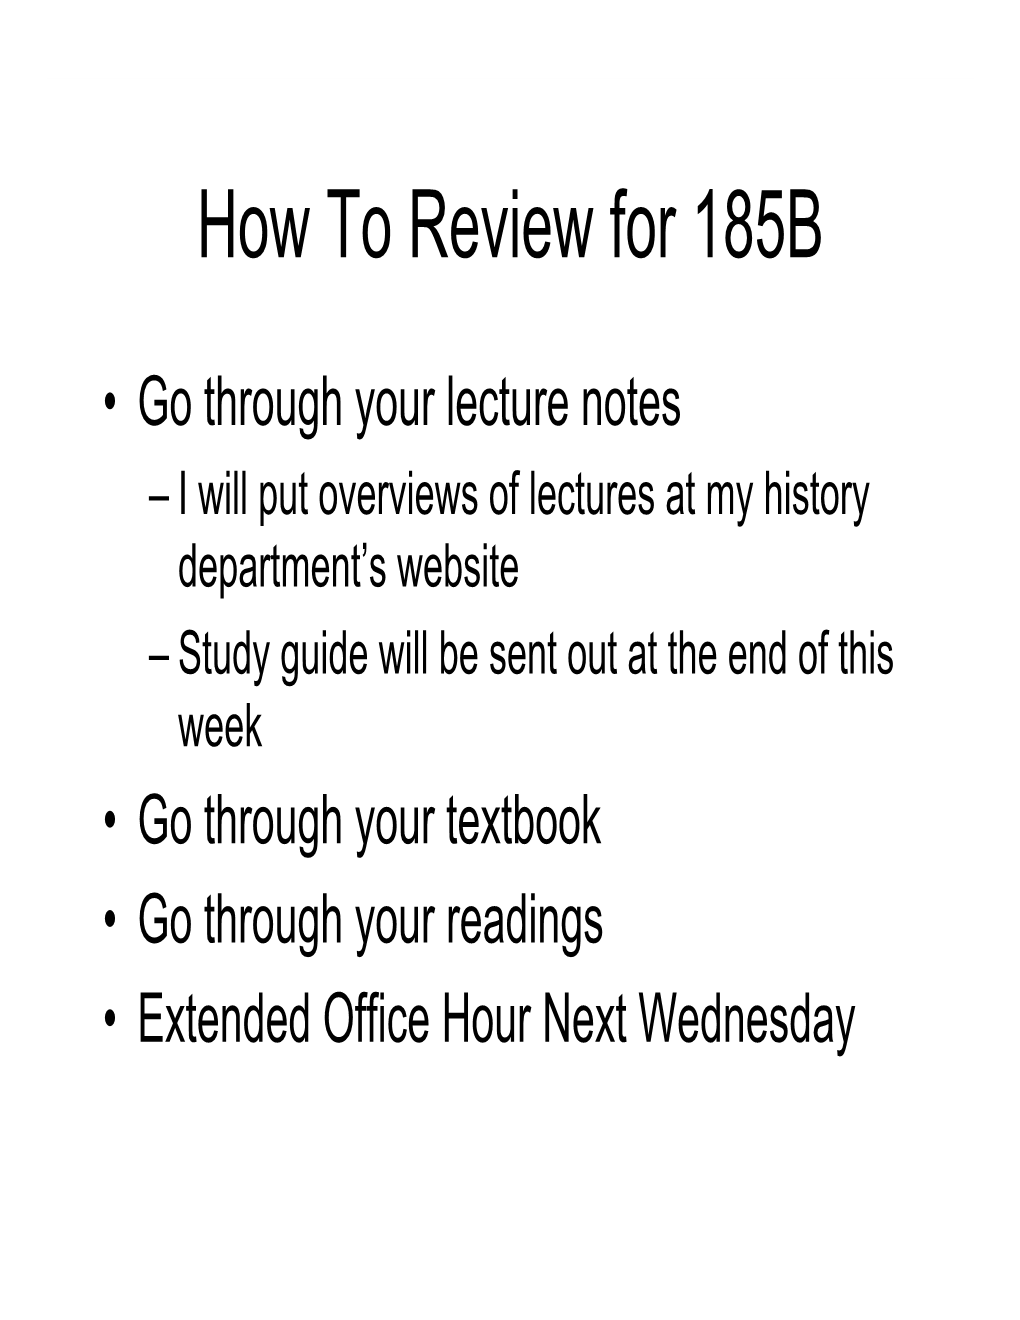 How to Review for 185B